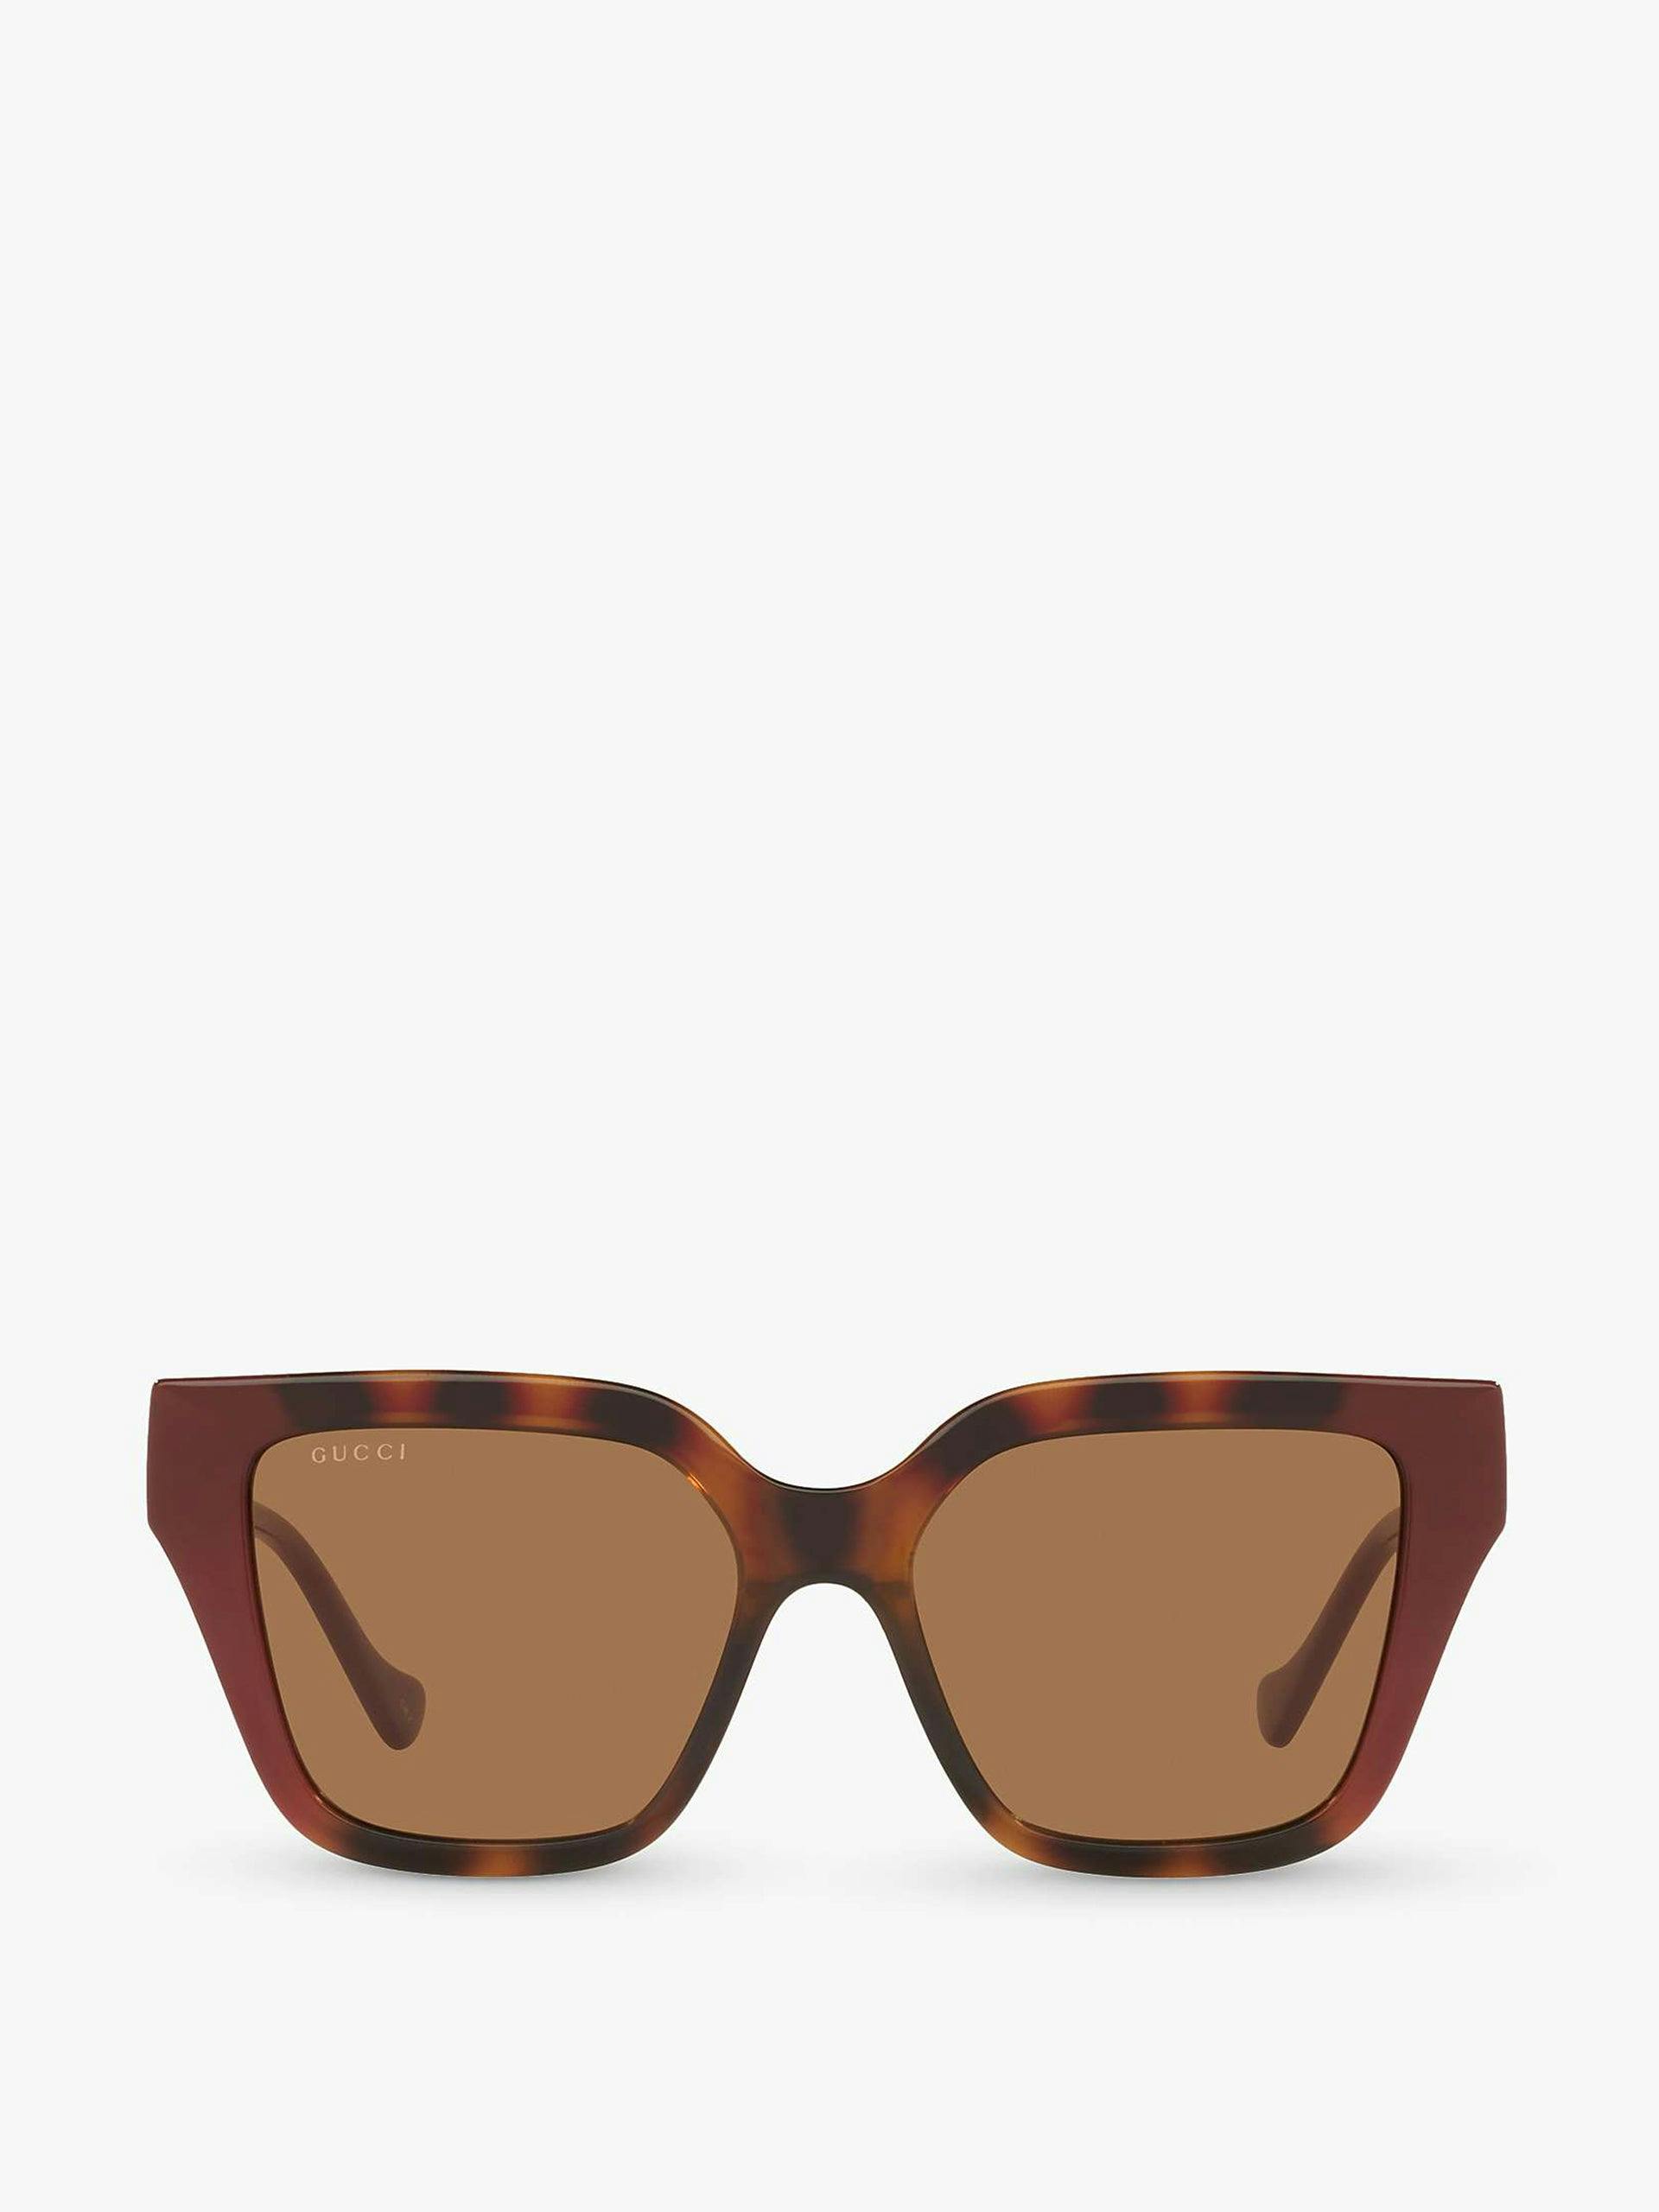 Brown and red sunglasses